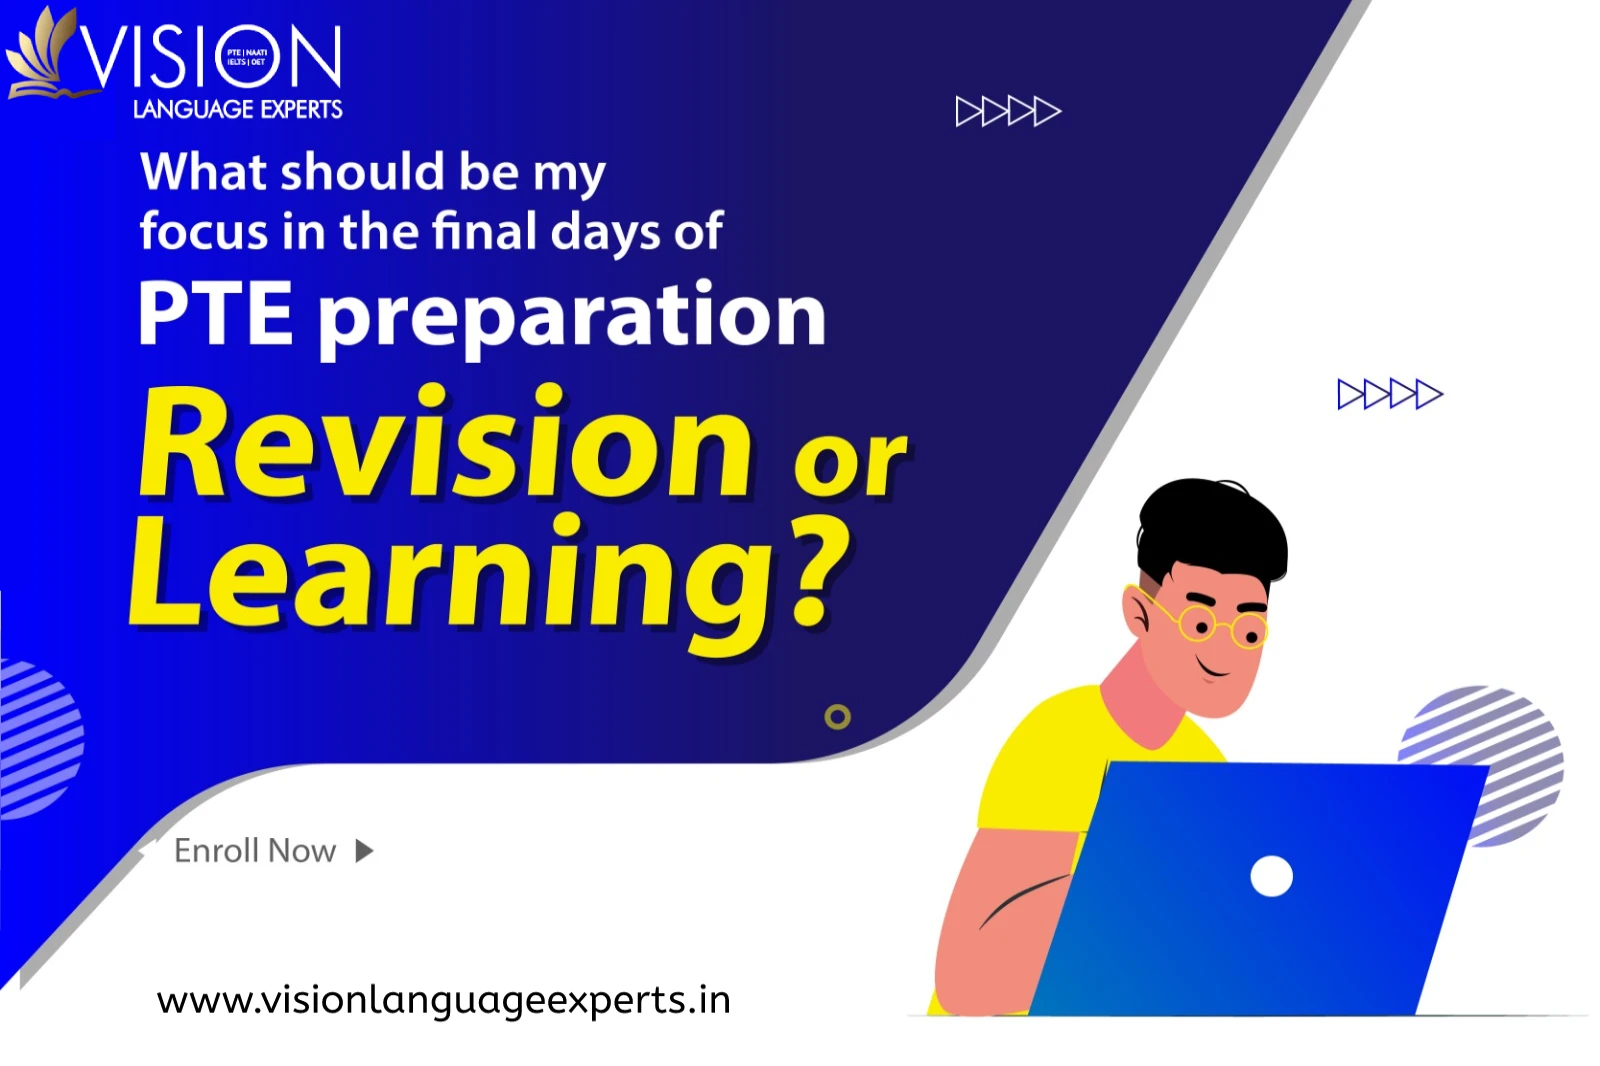 What should be my focus in the final days of PTE preparation: Revision or Learning?